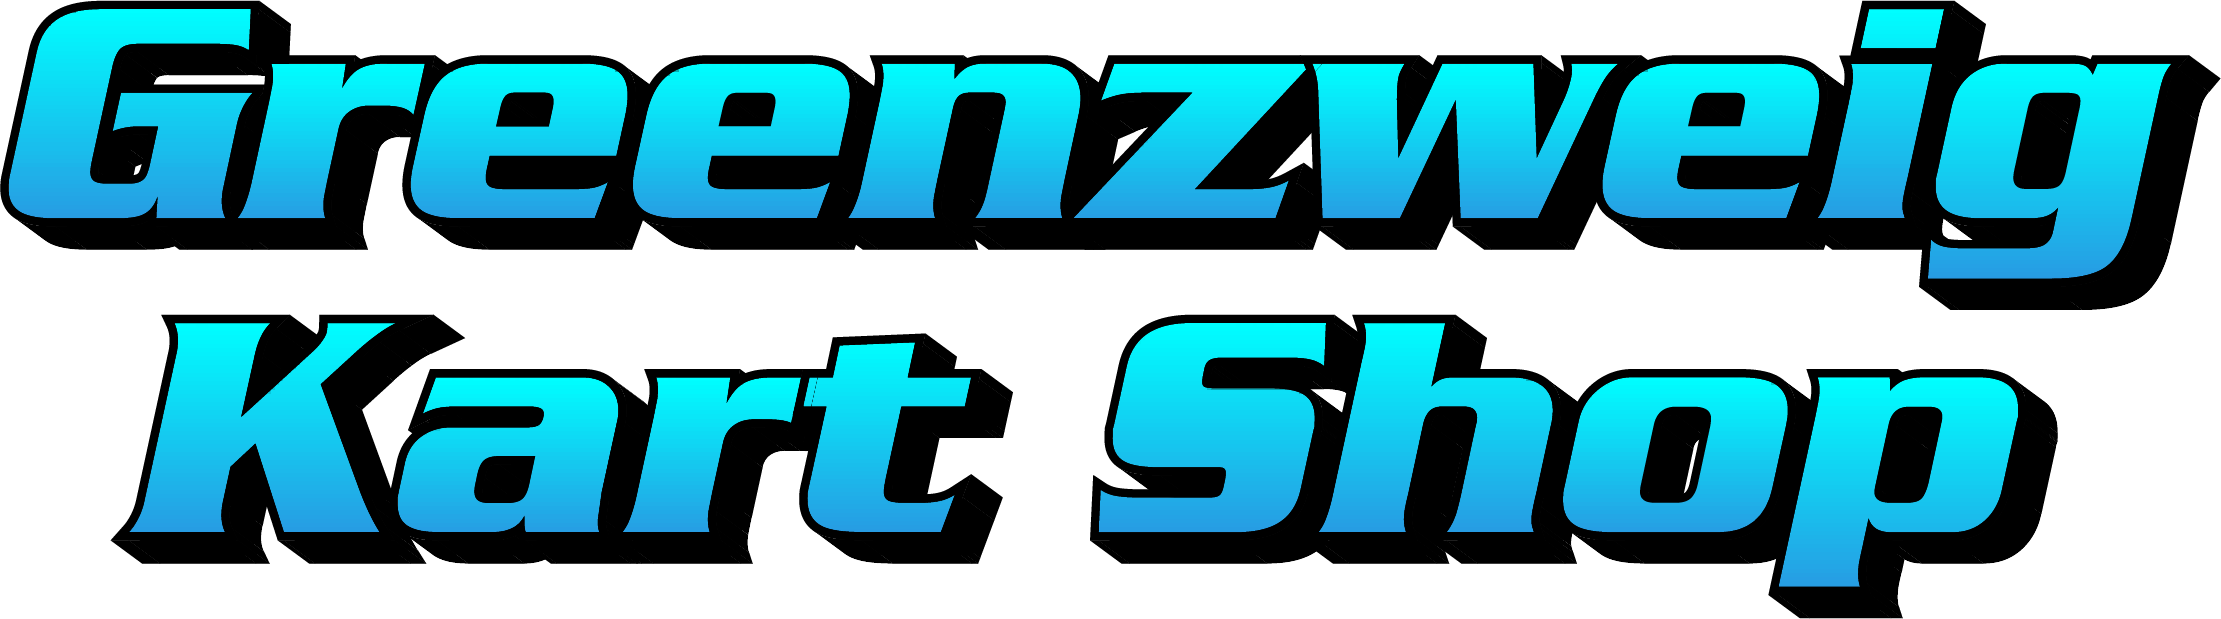 Greenzweig Kart Shop – Greenzweig Kart Shop is National Winning 4-Cycle and  2-Cycle Kart Shop with over 50 years of experience in racing!